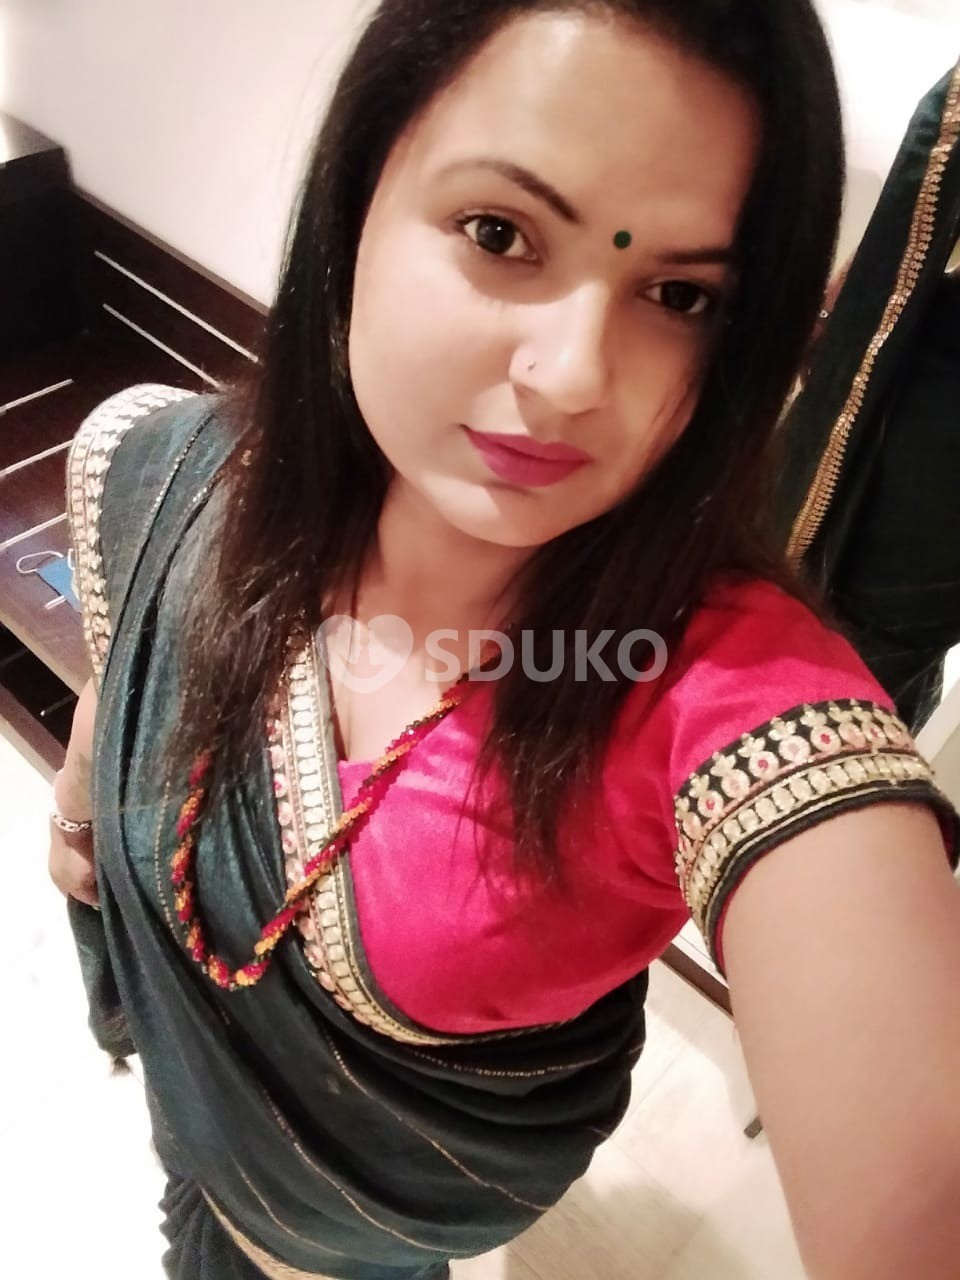 Mapusa ✅❣️❣️100% SAFE AND SECURE TODAY LOW PRICE UNLIMITED ENJOY HOT COLLEGE GIRL HOUSEWIFE AUNTIES AVAILABLE 